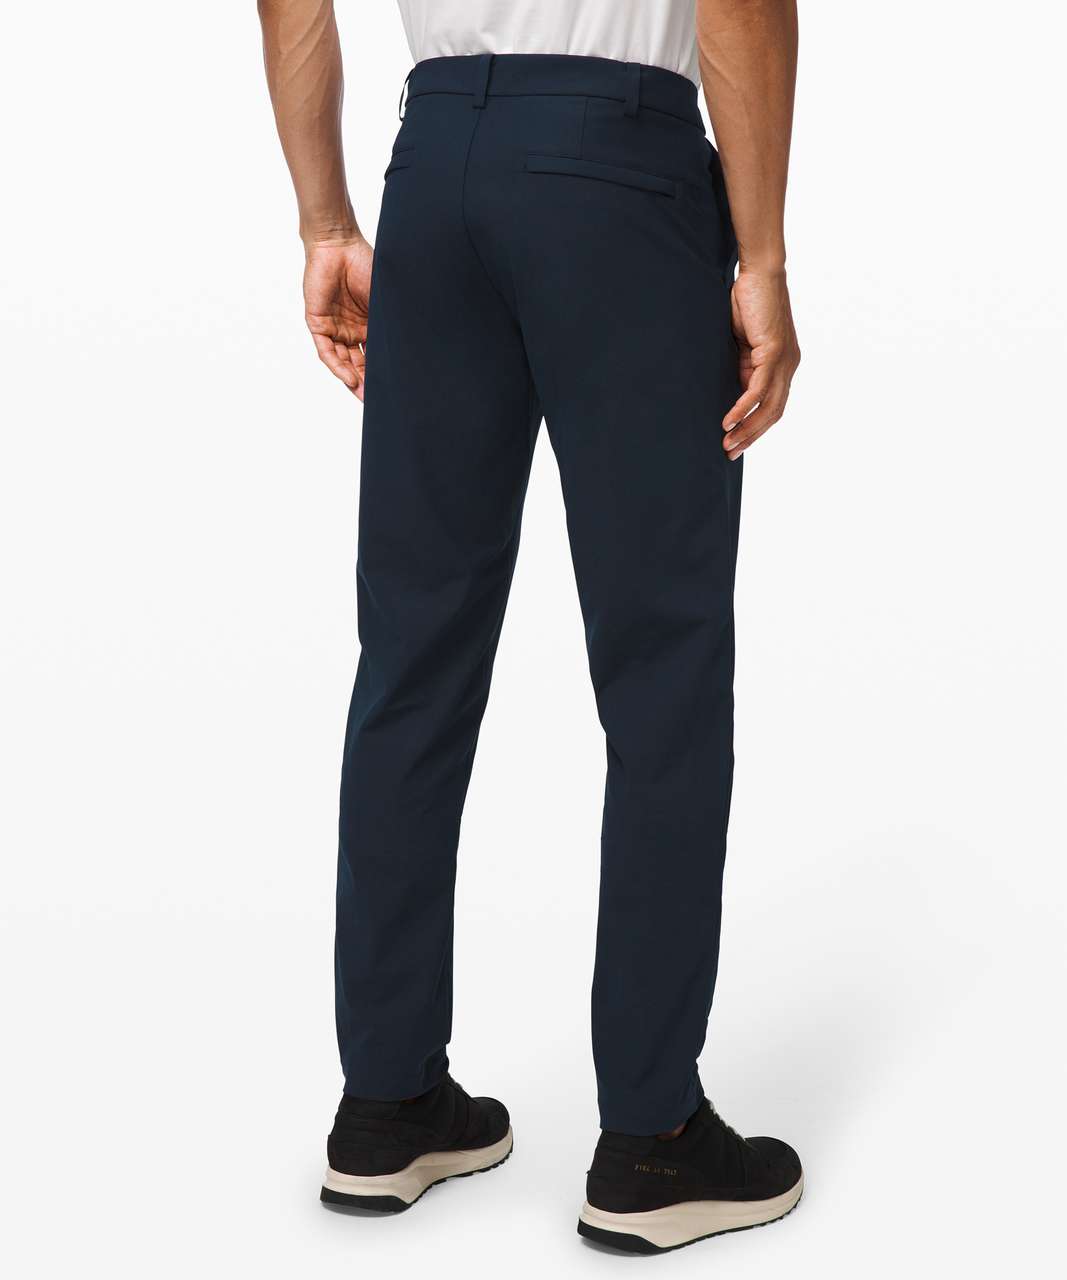 Lululemon Commission Pant Classic *Warpstreme 28" - True Navy (First Release)